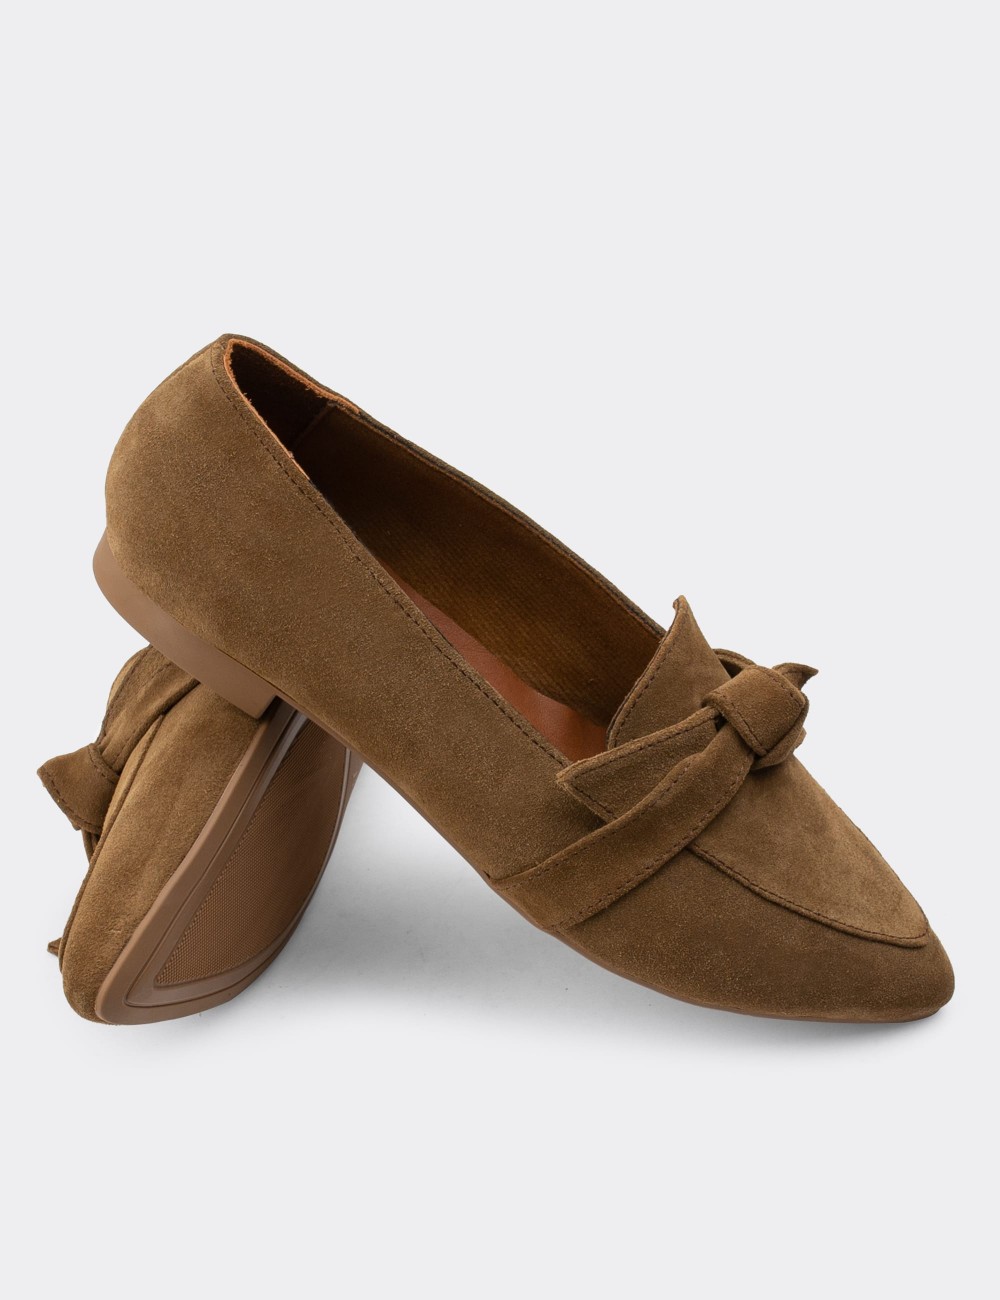 Tan Suede Leather Loafers - 01898ZTBAC01